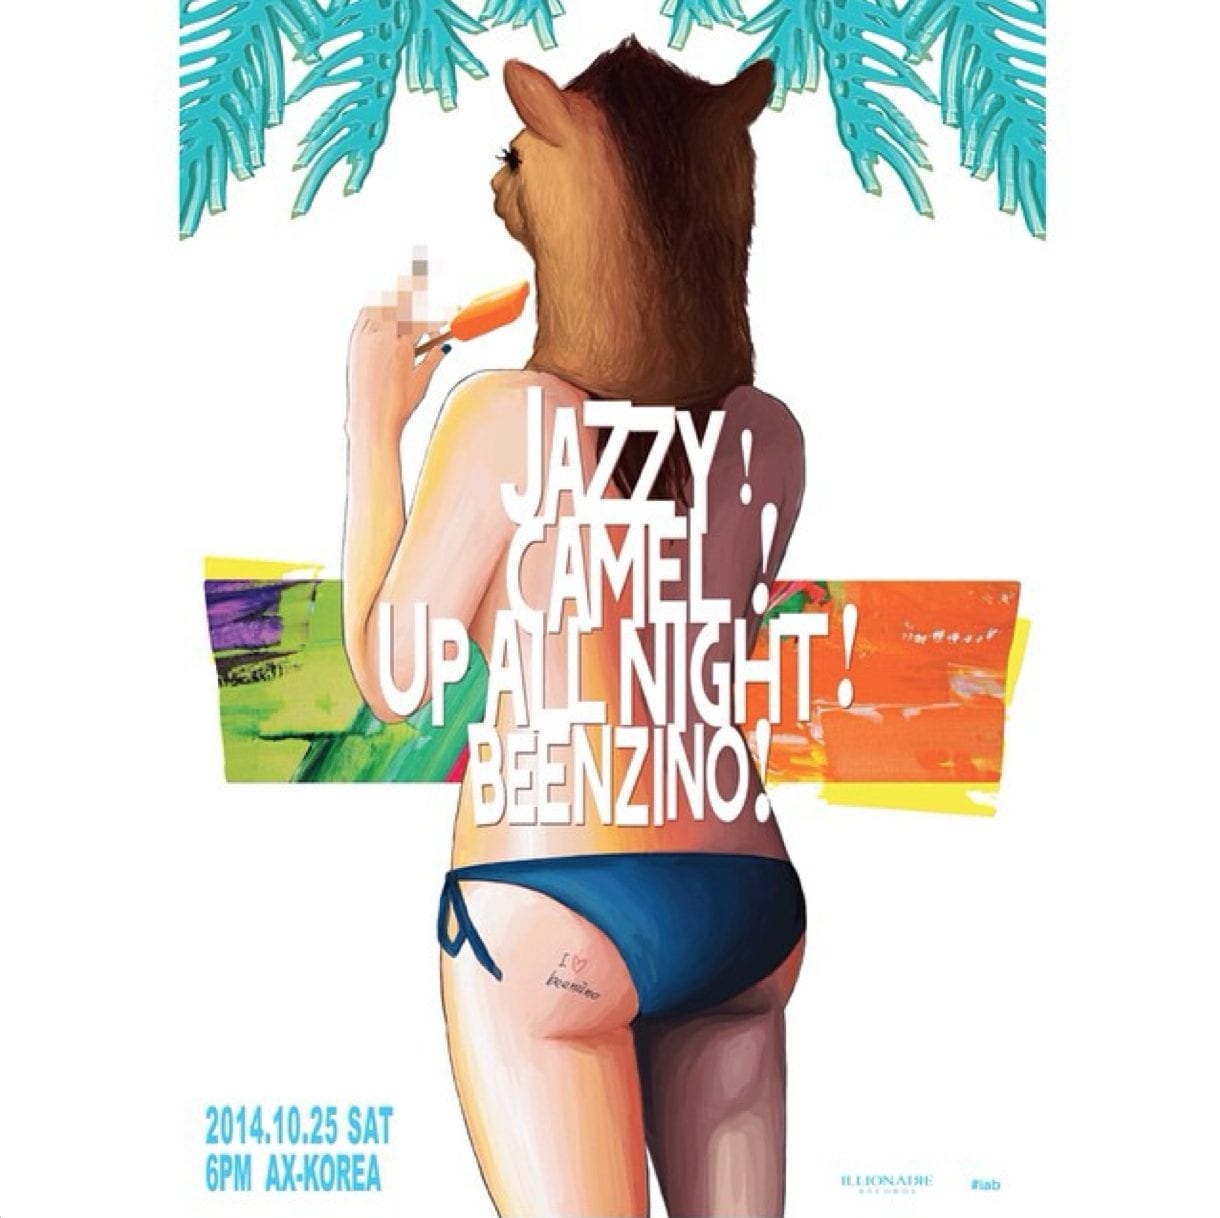 Beenzino - Up All Night release party poster